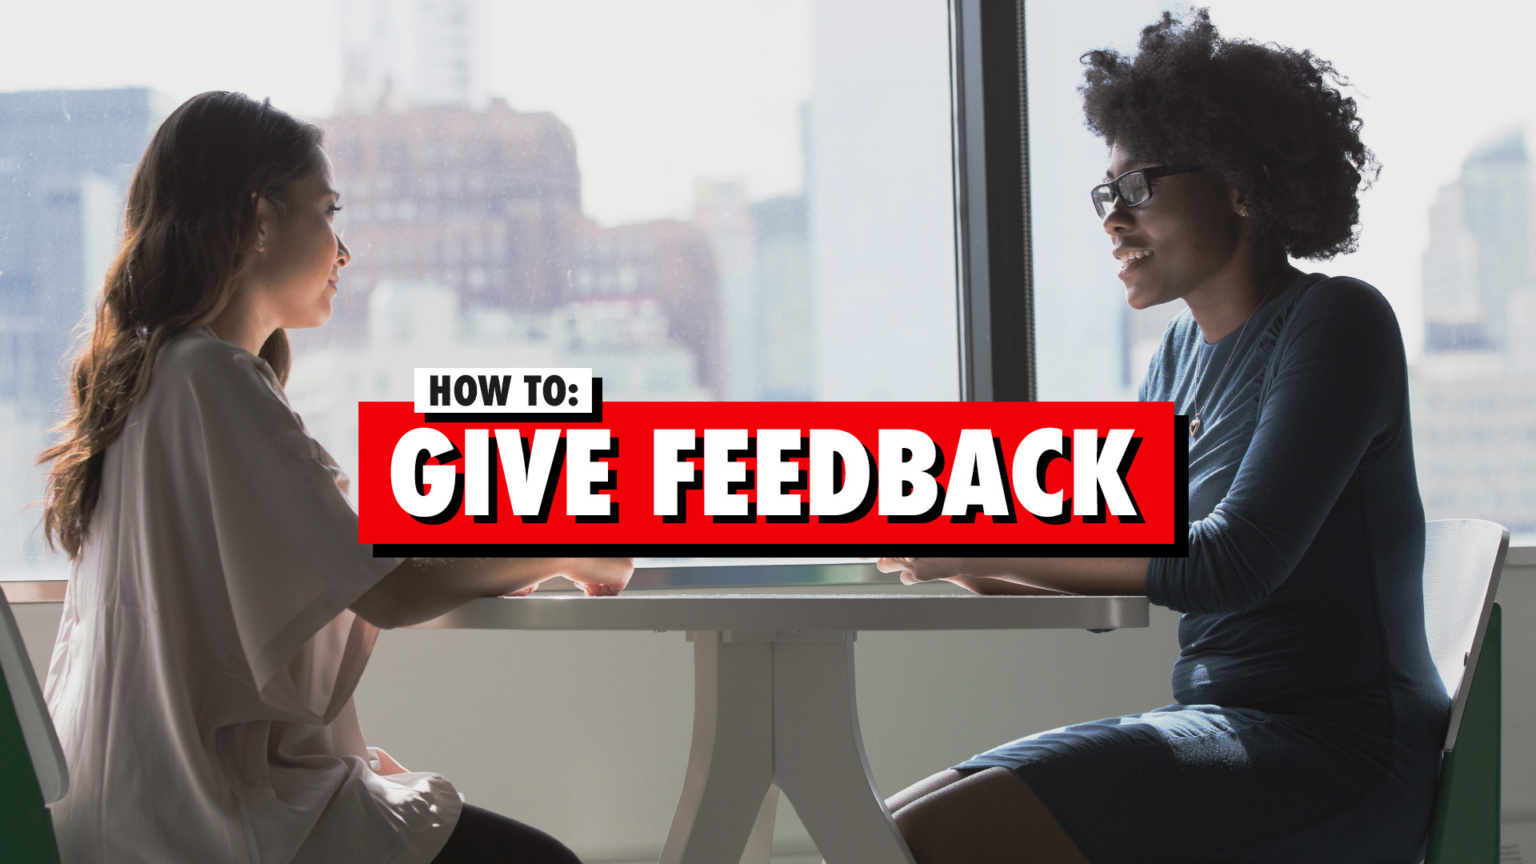 Trevor Ambrose Public Speaking Sales Training Blog How To Give Feedback